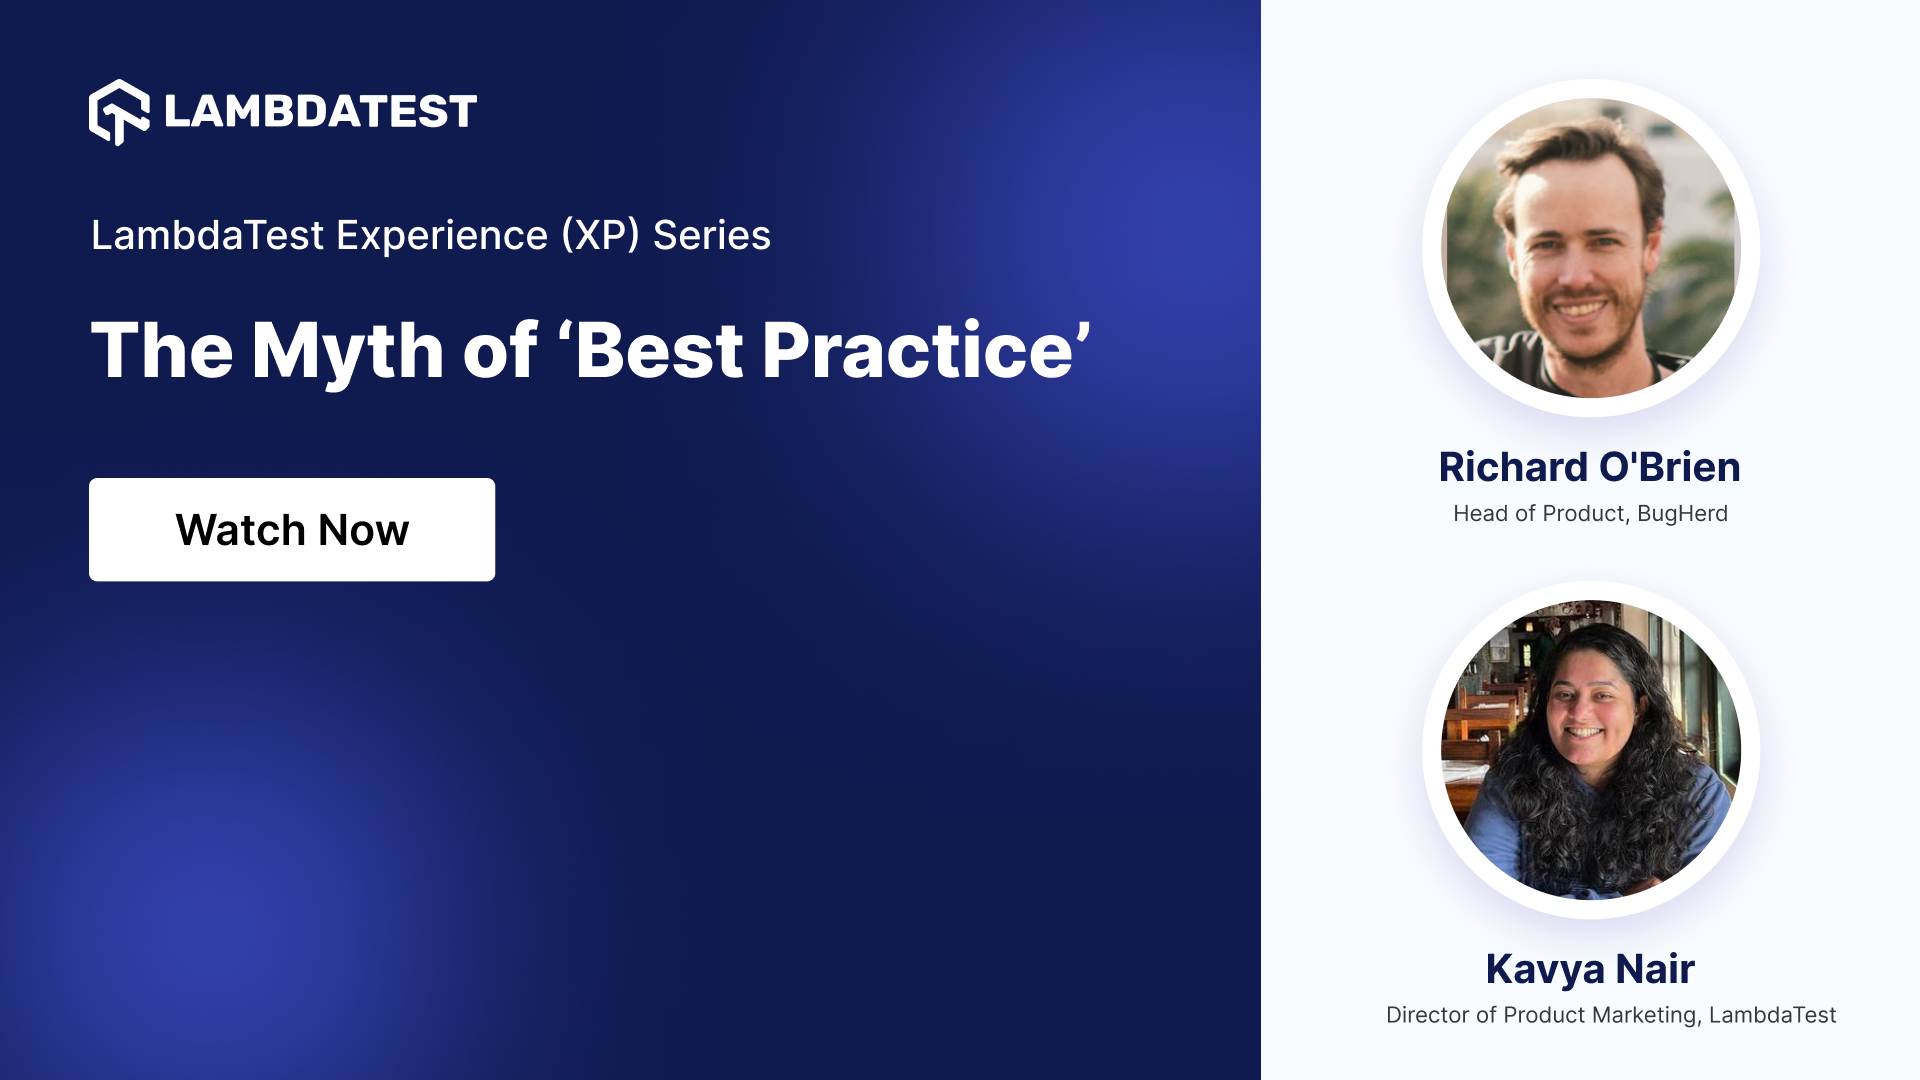 The Myth of 'Best Practice'